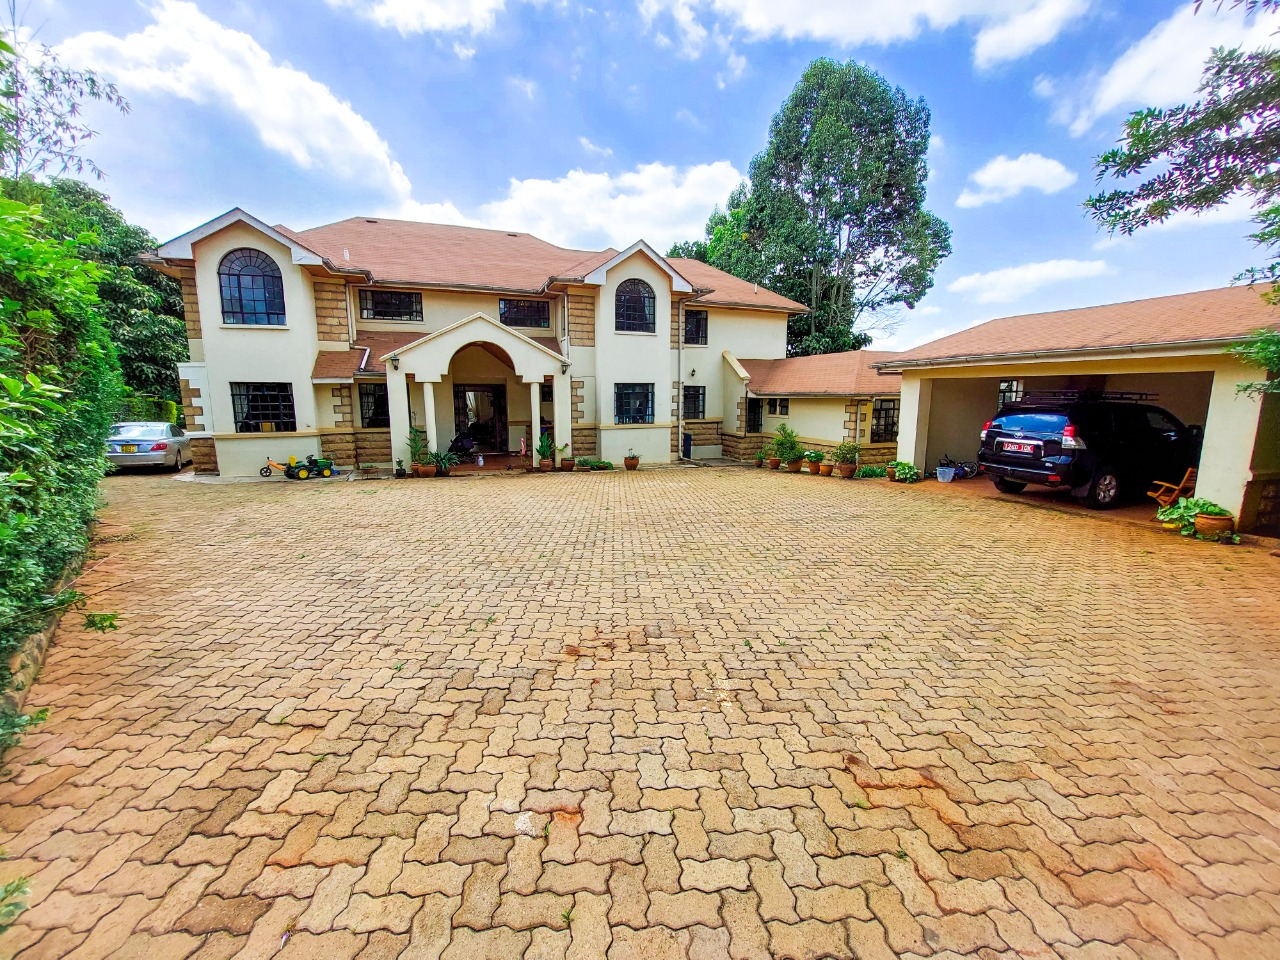 4 bedroom house for sale Woodvale Drive, Runda, Nairobi. Mbugani Villas. close to the UNEP, Rosslyn Academy, German school and the Village market. FIT PROPERTY